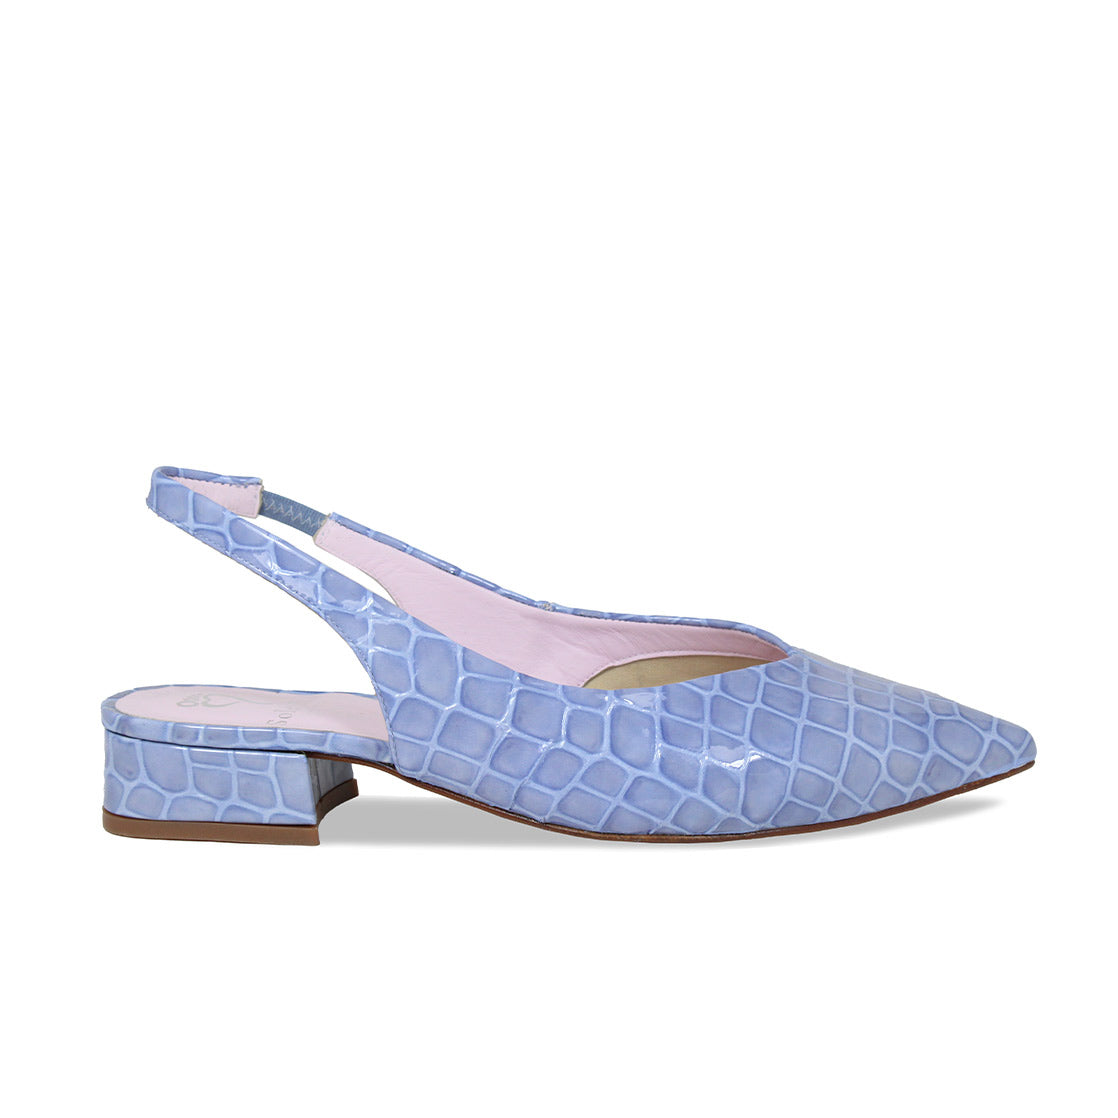 Sienna: Pale Blue Croc - Sling-Back Flats for Bunions | Sole Bliss